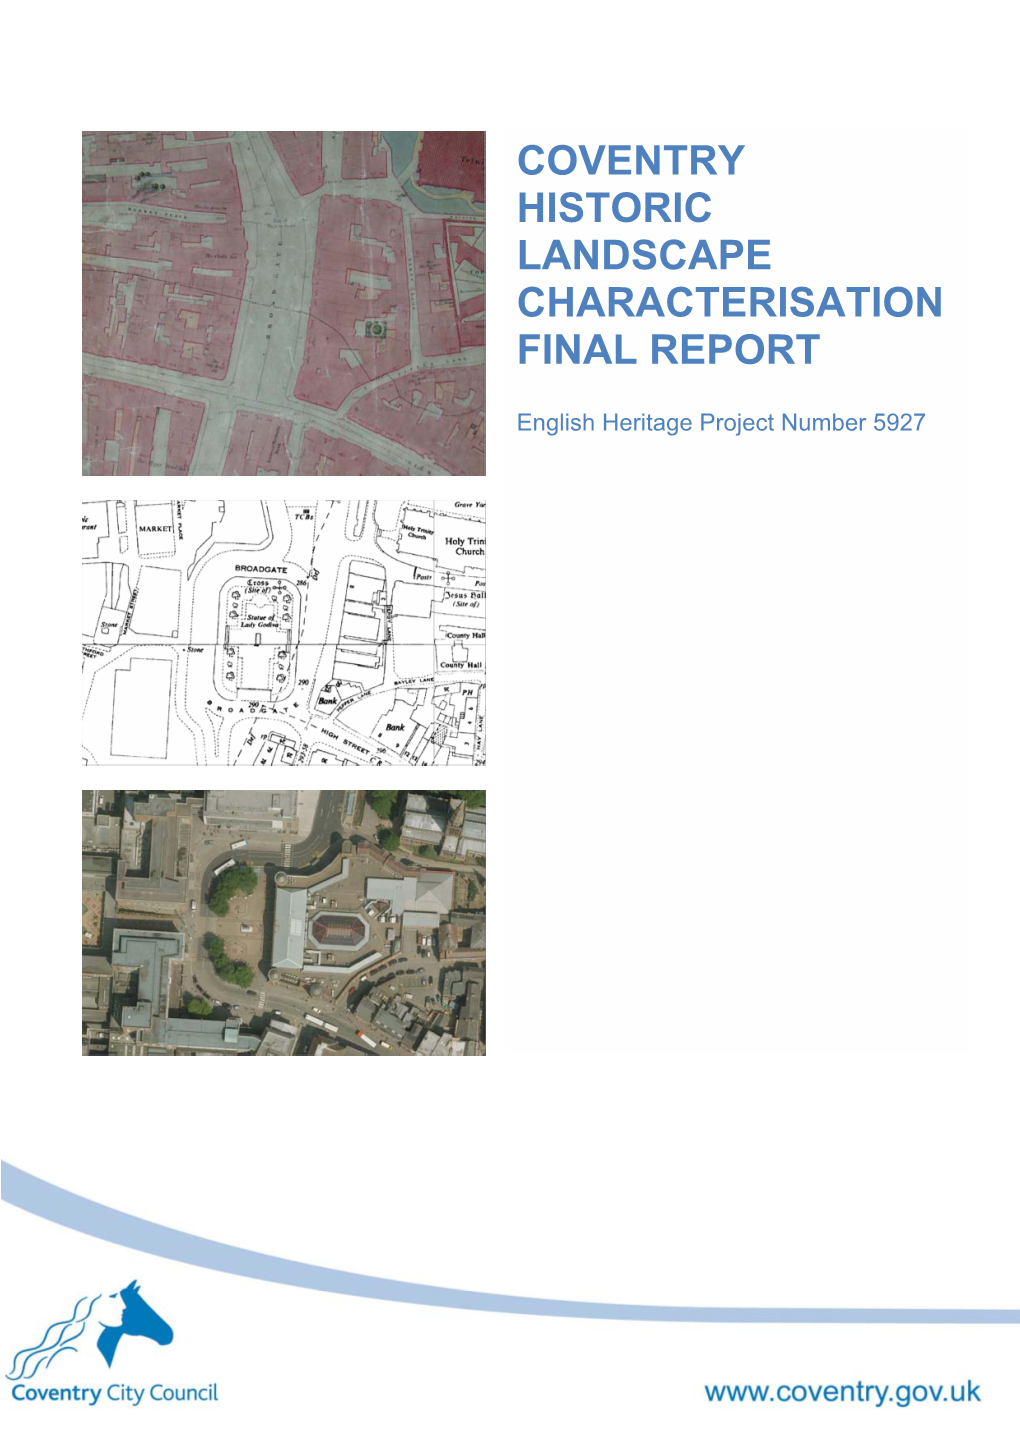 Coventry Historic Landscape Characterisation Final Report